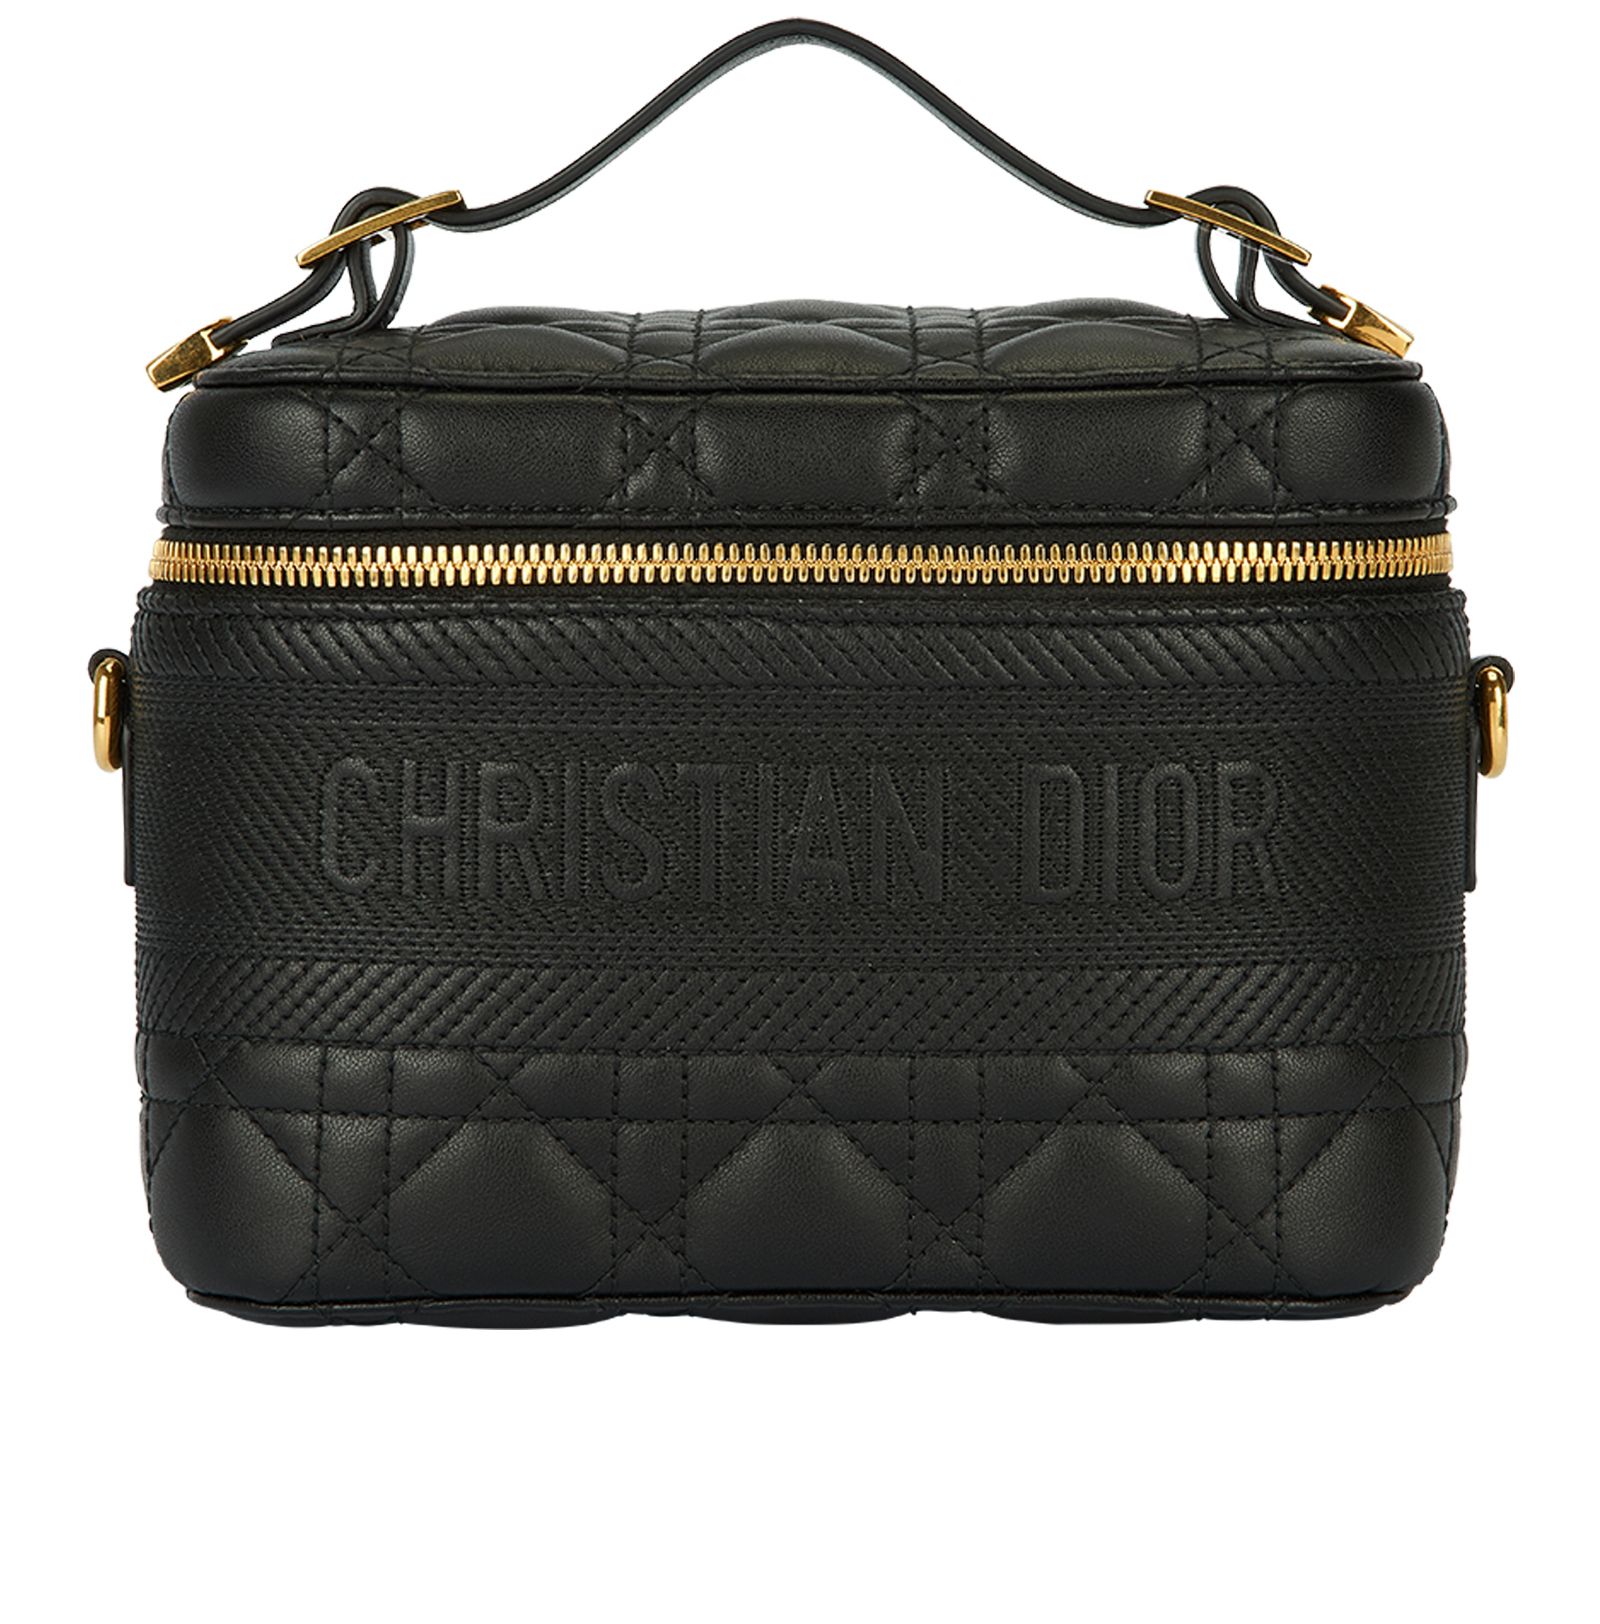 Shop Christian Dior Dior Travel Vanity case by sweetピヨ